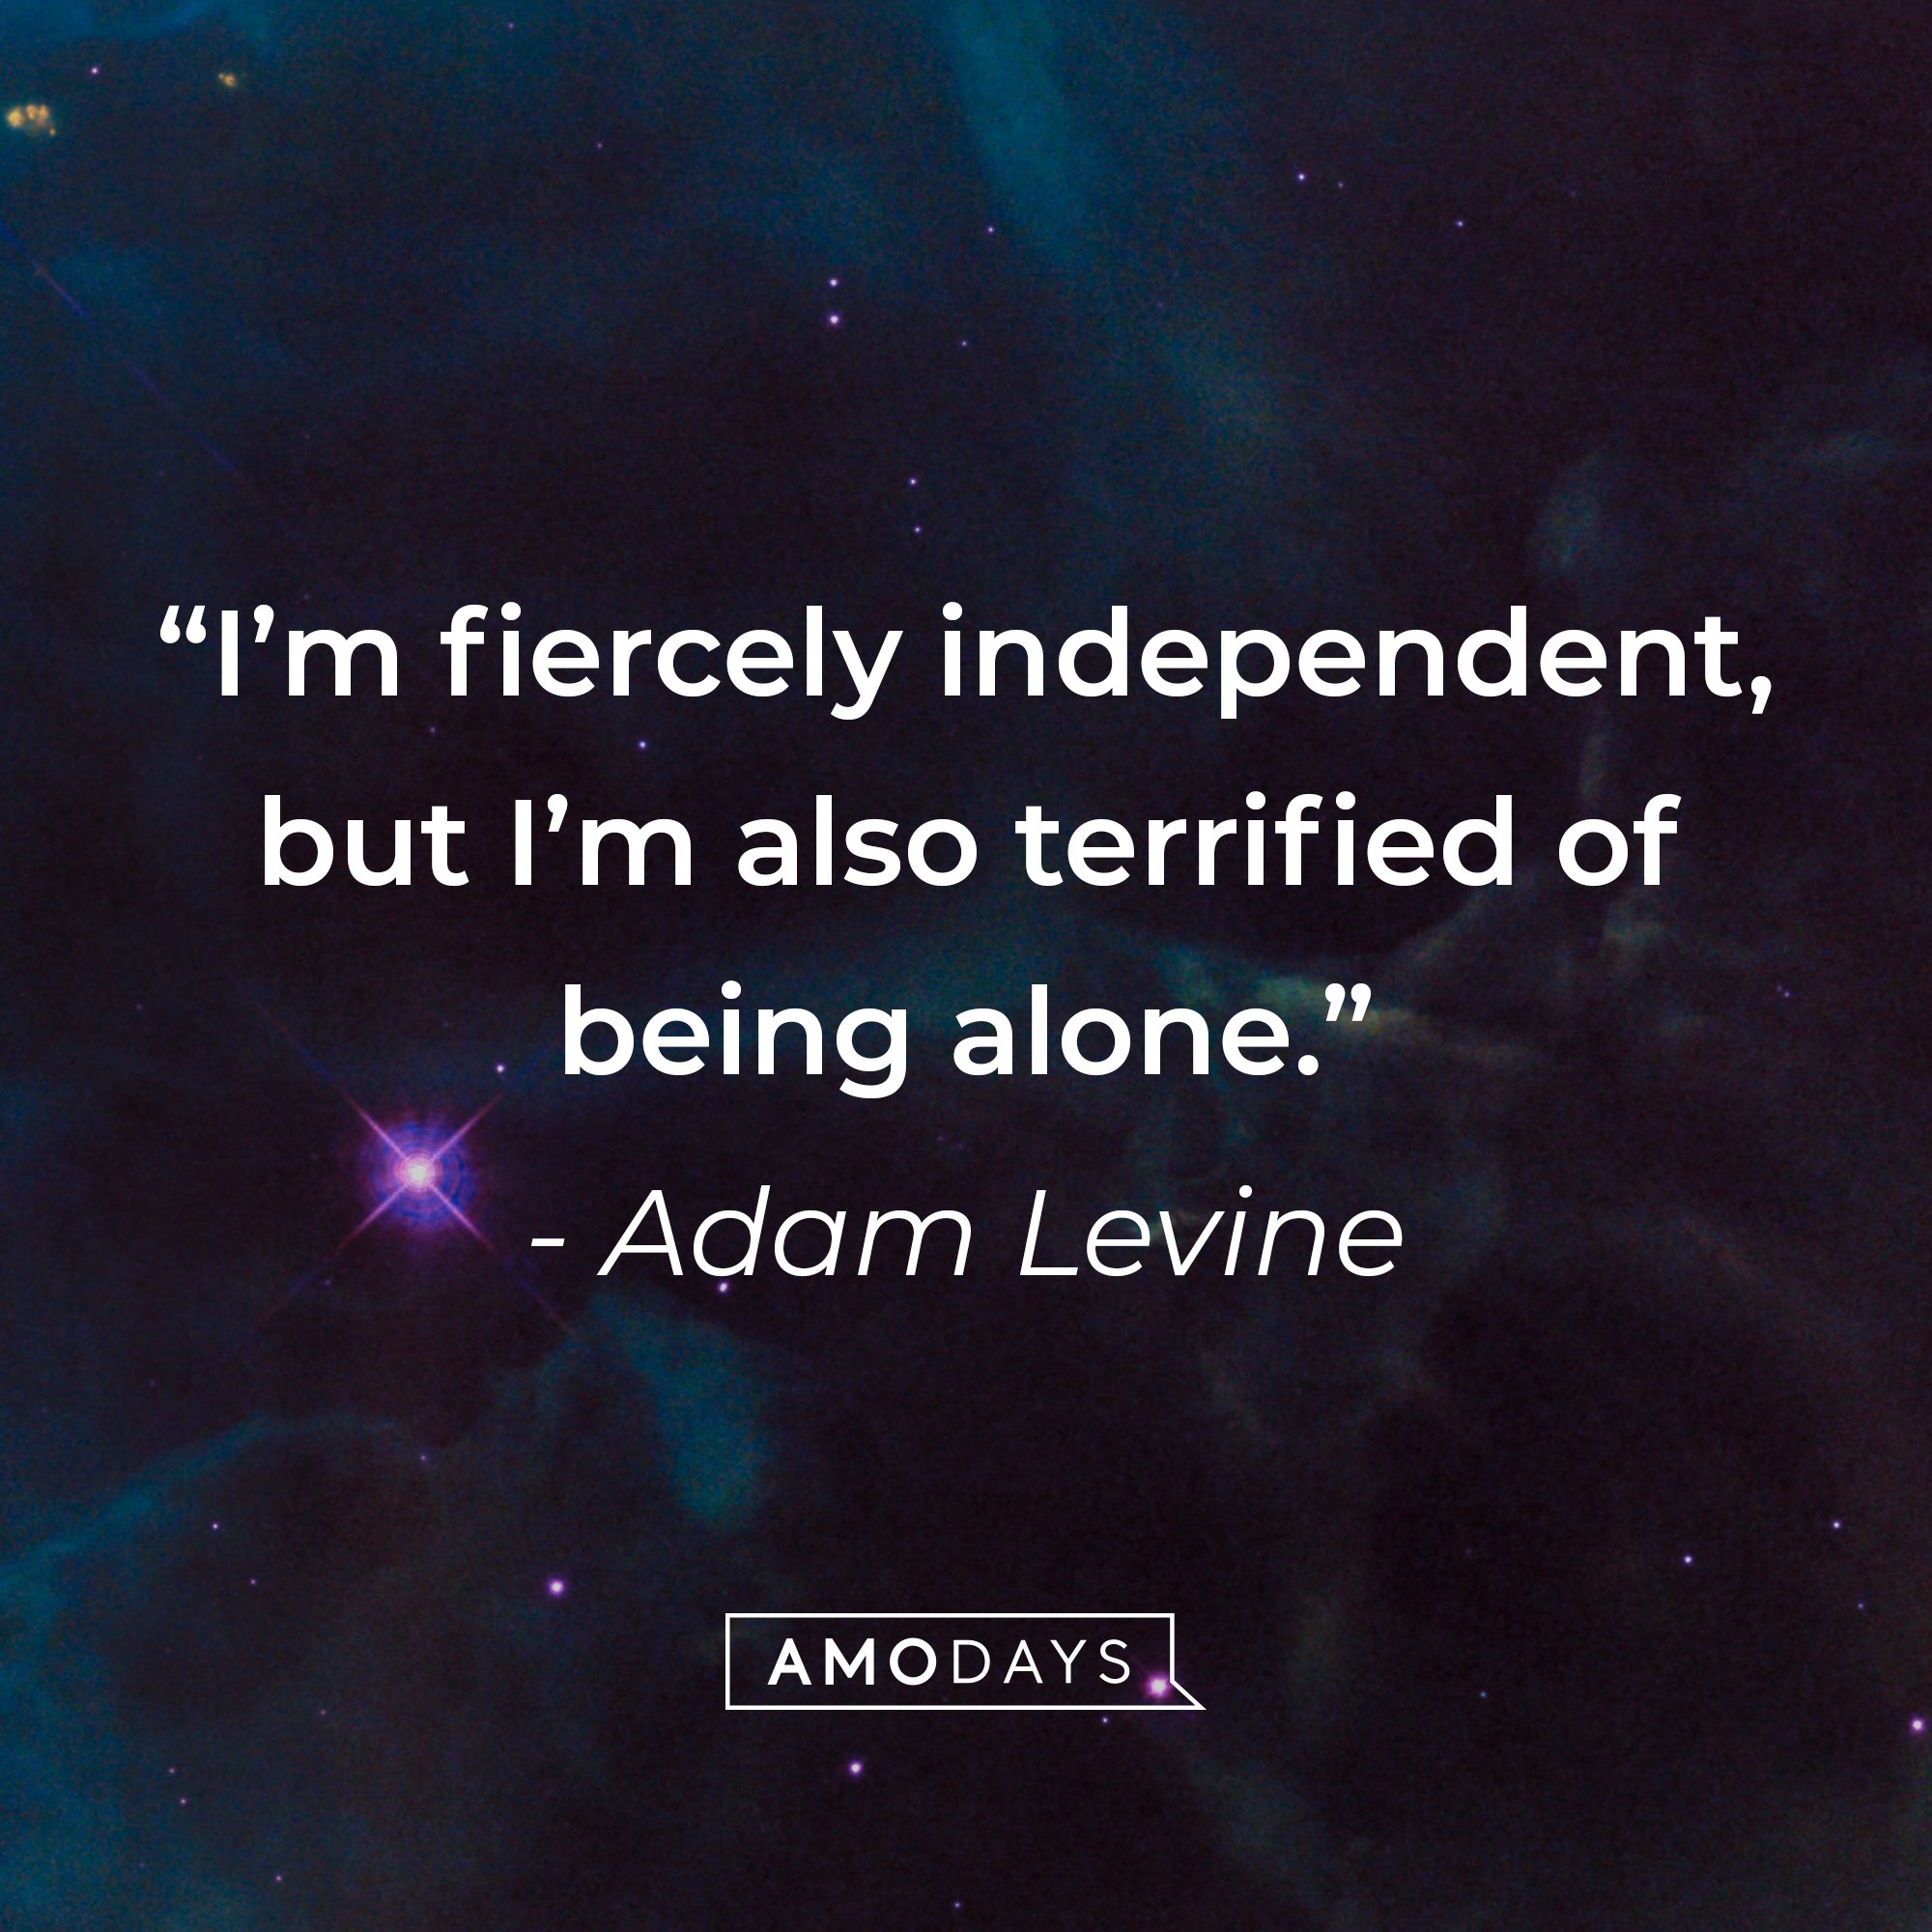 Adam Levine's quote: "I'm fiercely independent, but I'm also terrified of being alone." | Image: AmoDays